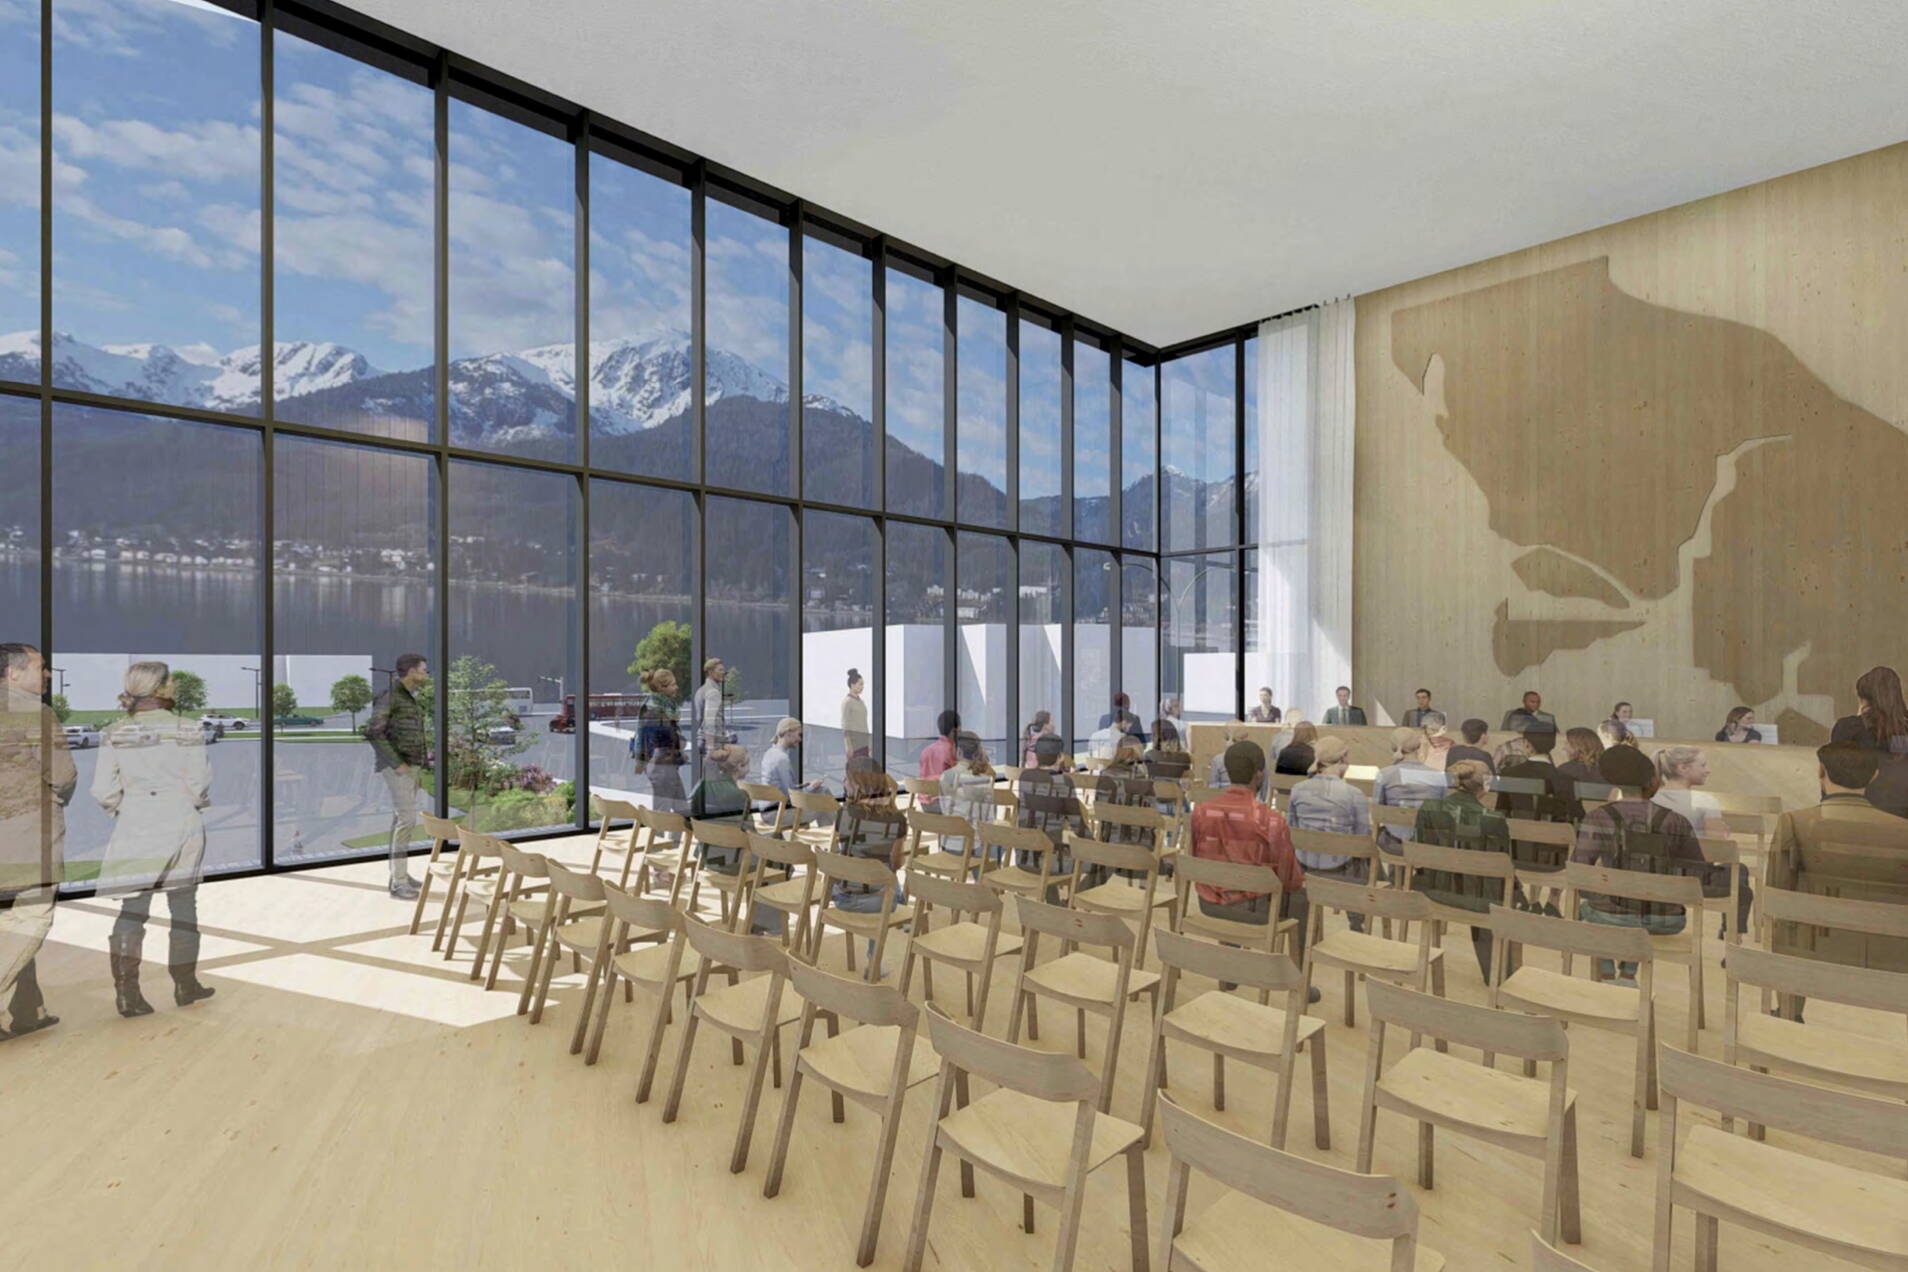 An artist’s depiction shows the public meeting space for a proposed new city hall in Juneau. The Juneau Assembly is scheduled to vote Monday on allocating $6.3 million in general funds toward the project expected to cost roughly $40 million, accepting public testimony beforehand. The Assembly is also scheduled to take final votes on other major items including next year’s budget and property tax mill rate. (SRS Architecture)